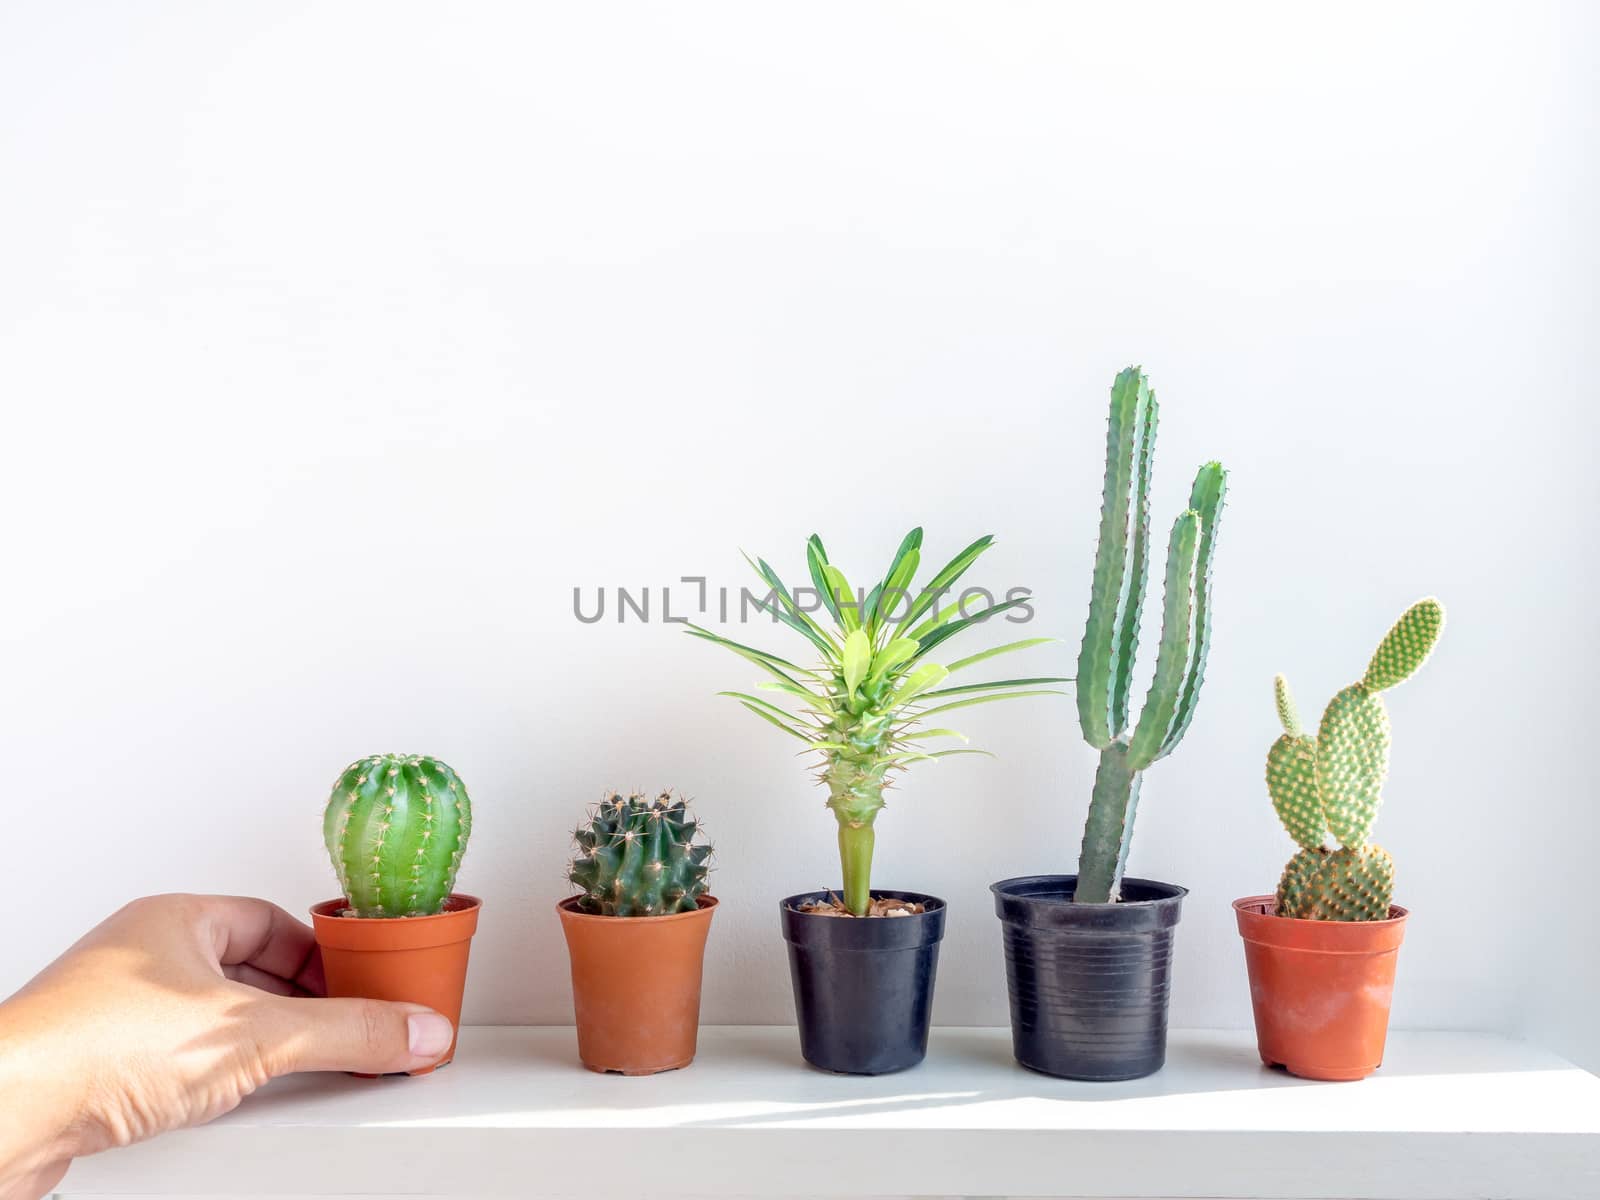 Hand put green cactus plant in plastic pots on white shelf on white wall background.